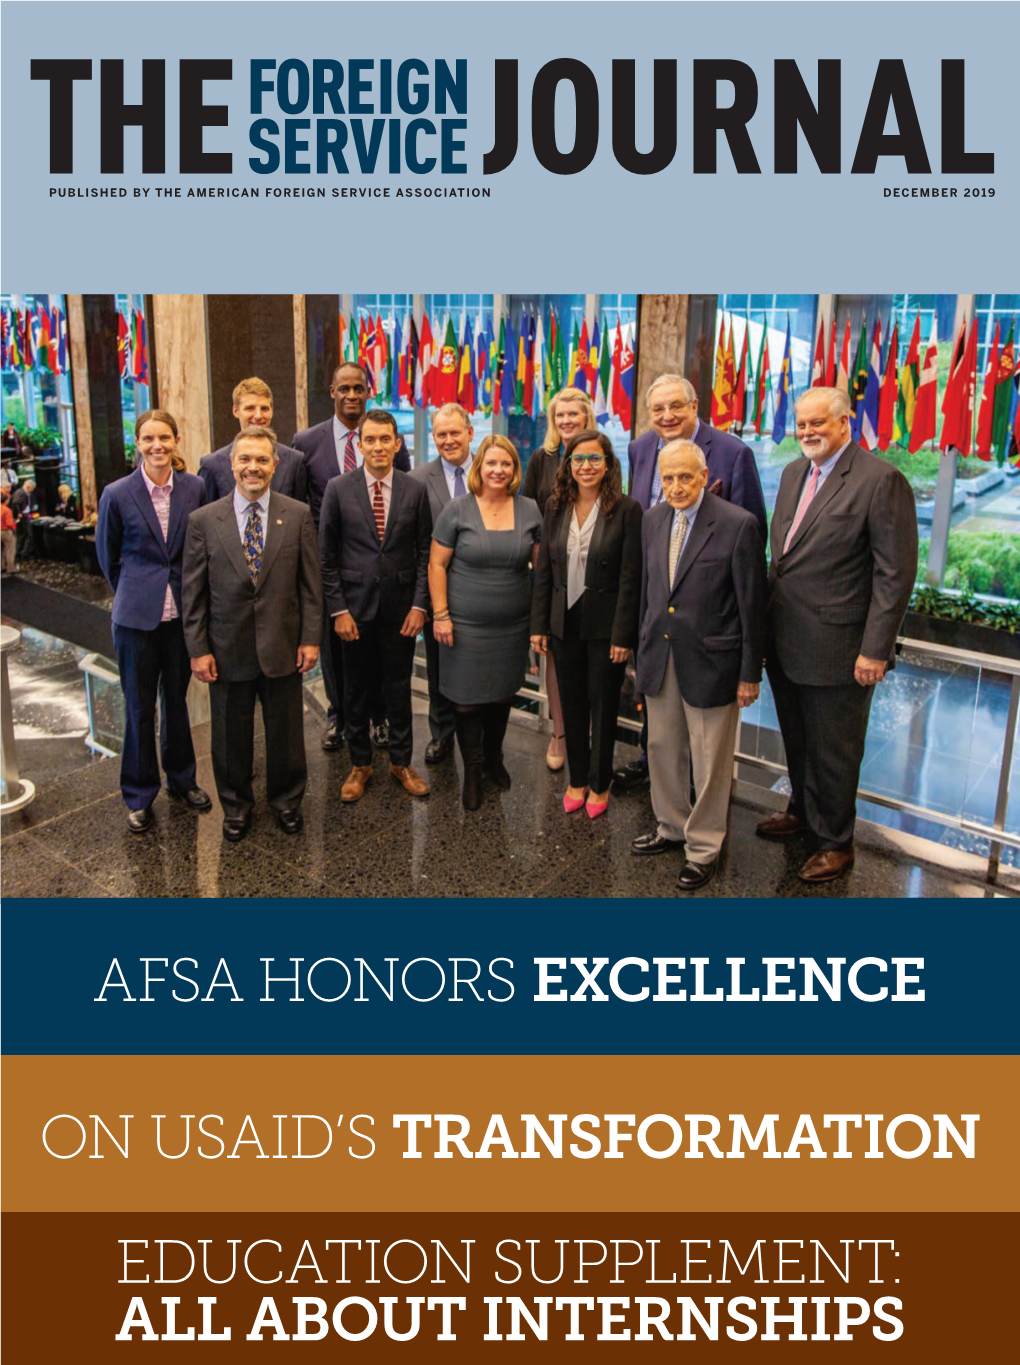 The Foreign Service Journal, December 2019